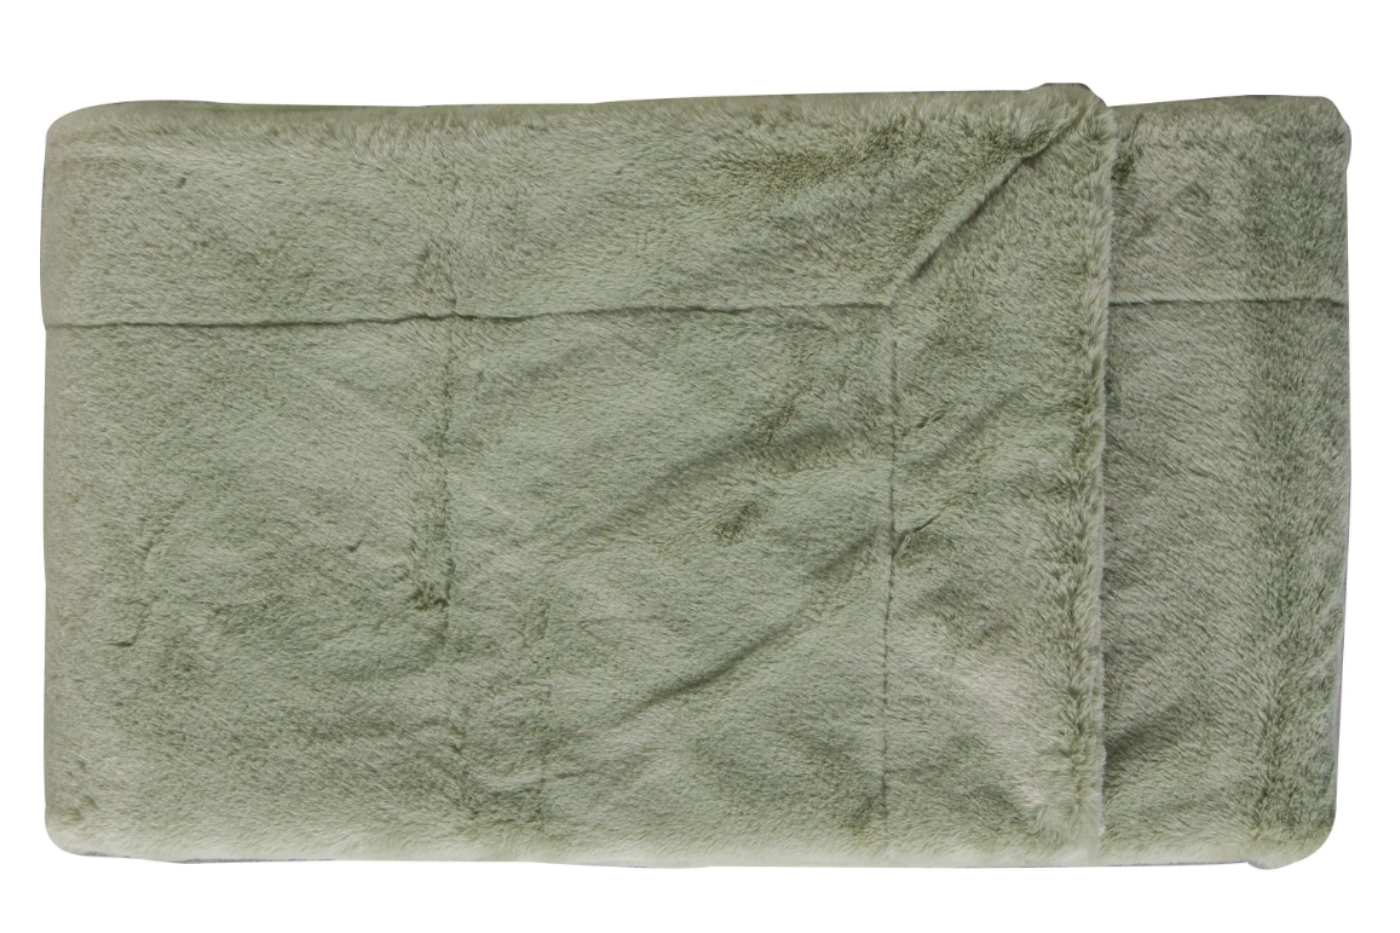 View Pale Green Faux Fur Throw With Stitched Fold Over Border Small information